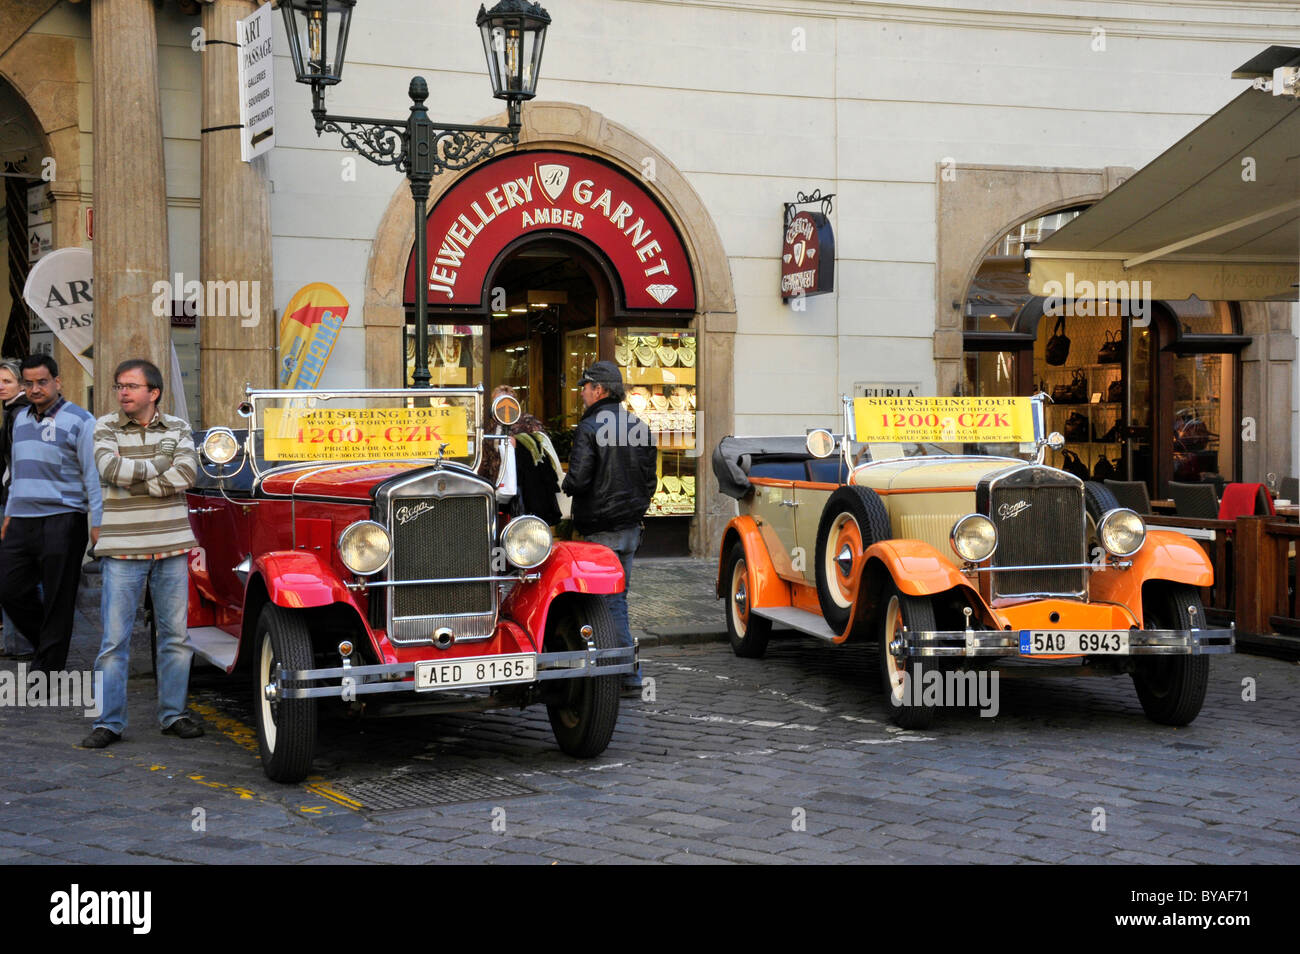 Vintage cars offered for sightseeing tours, Small Square, historic district, Prague, Bohemia, Czech Republic, Europe Stock Photo